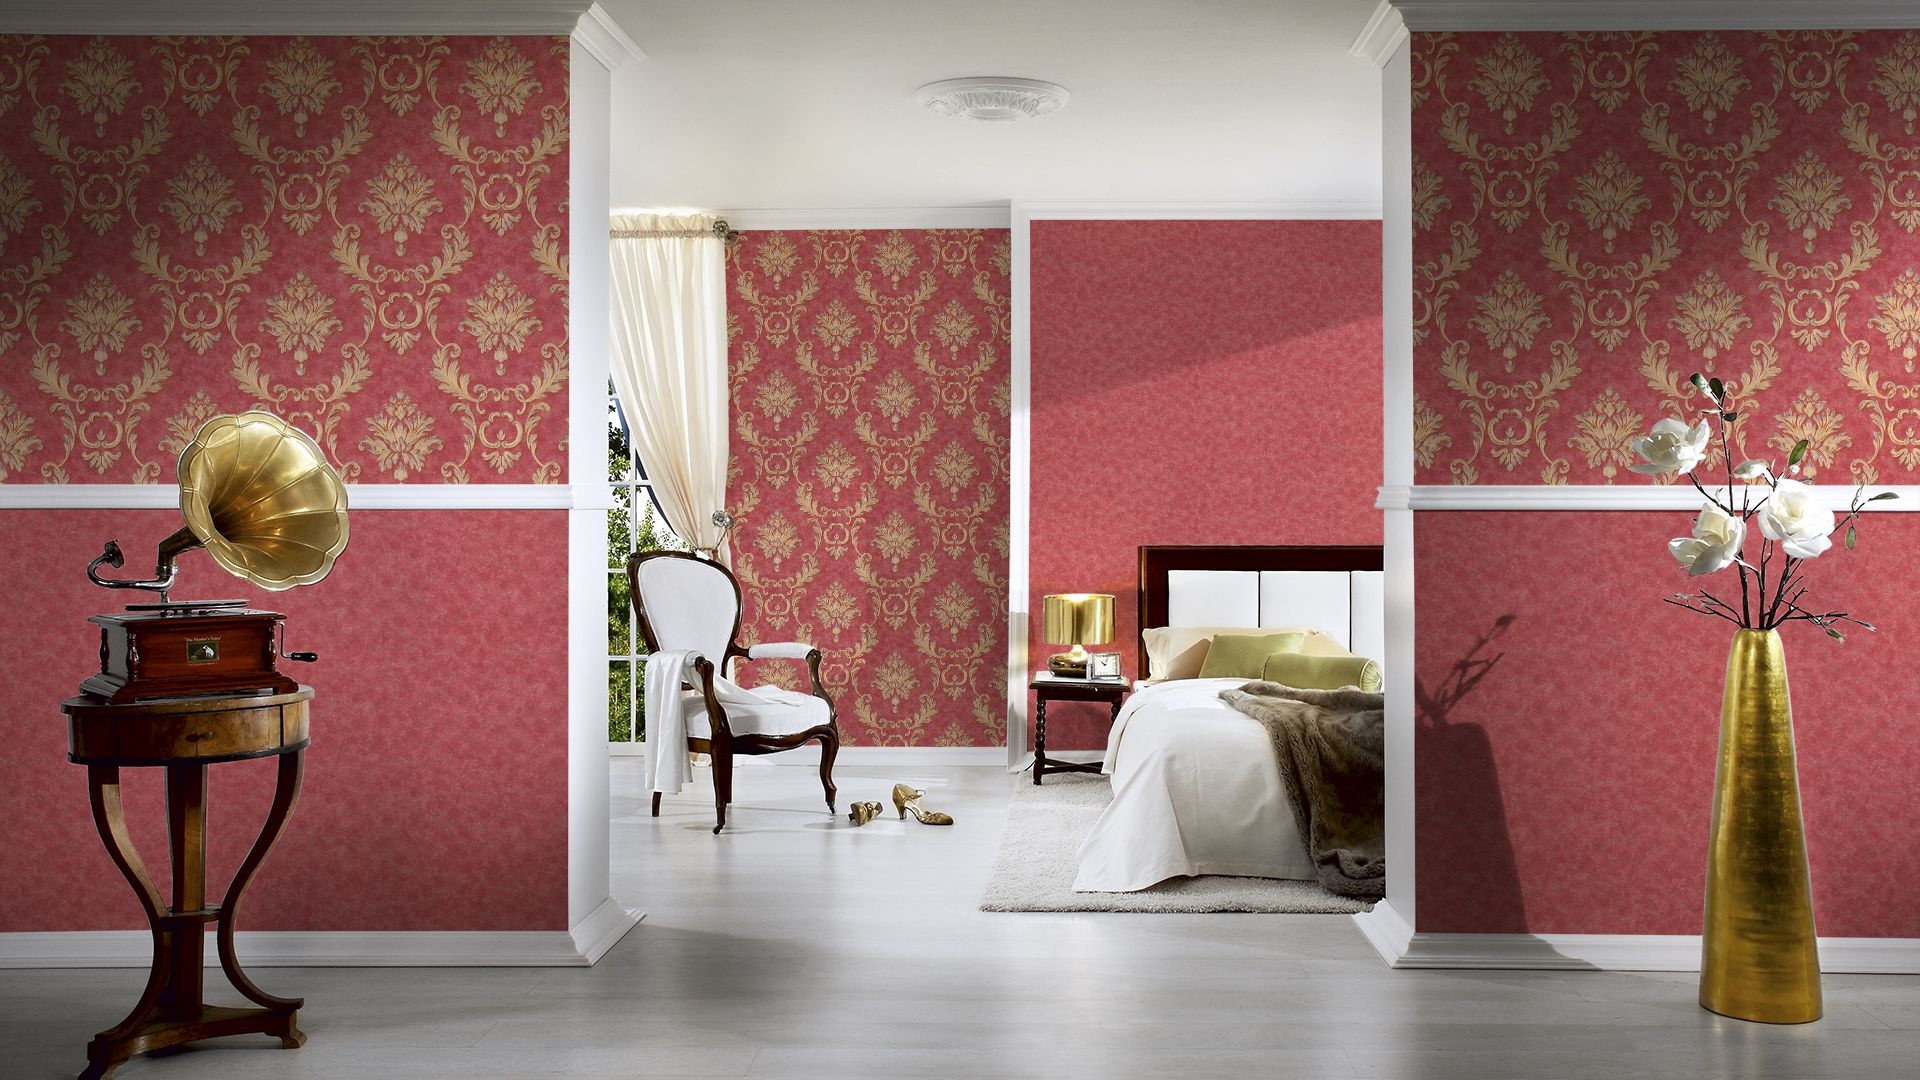 Architects Paper Luxury Wallpaper, Barock Tapete, rot, gold 324226